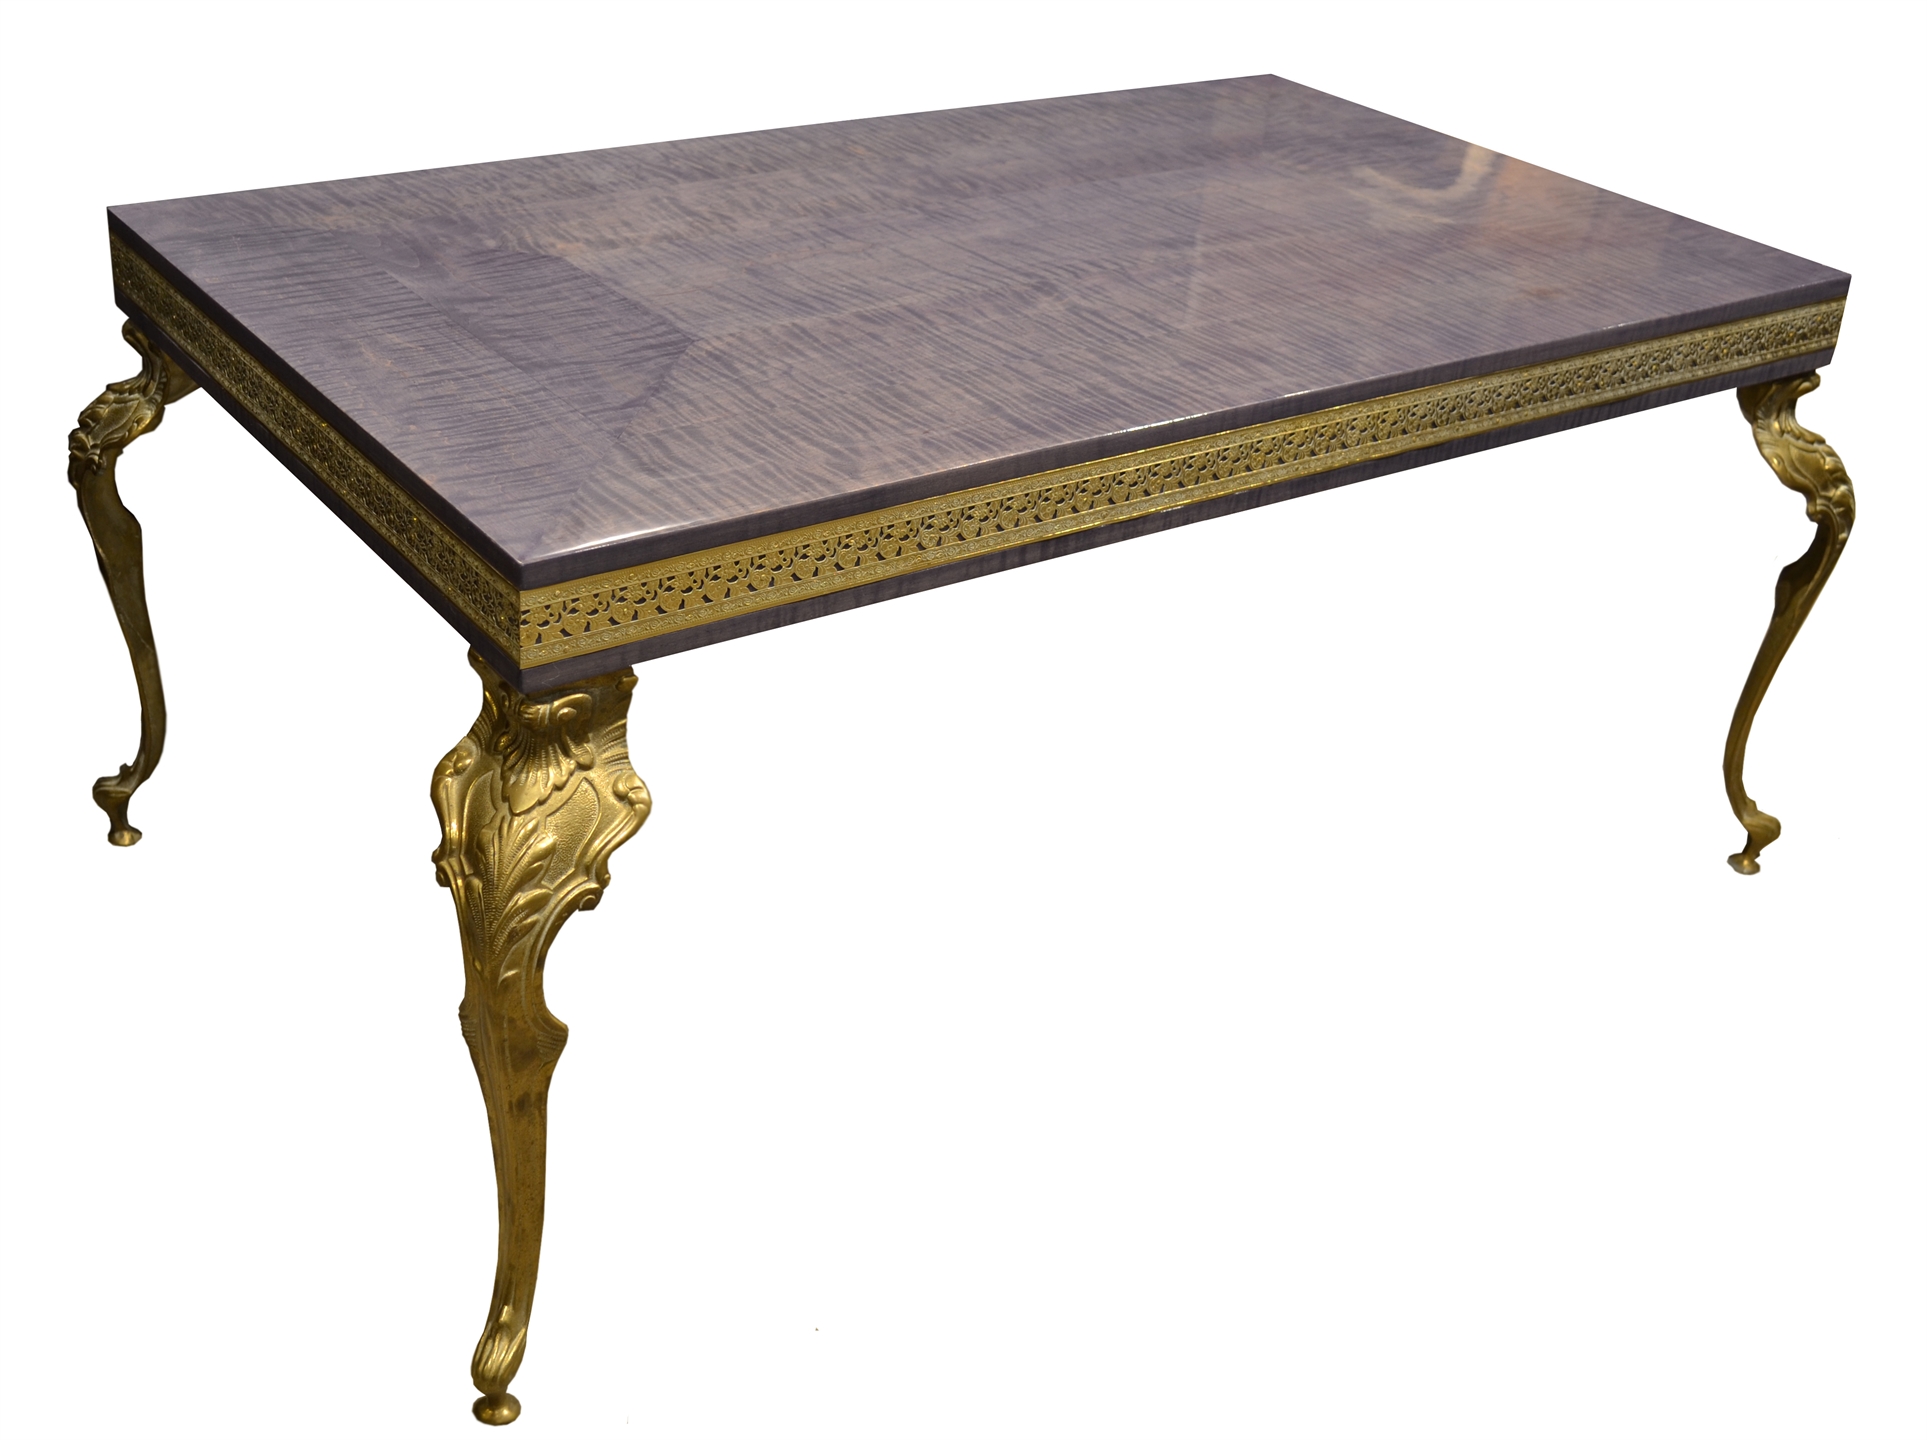 MB/3059 - Curly Maple and Brass Coffee Table